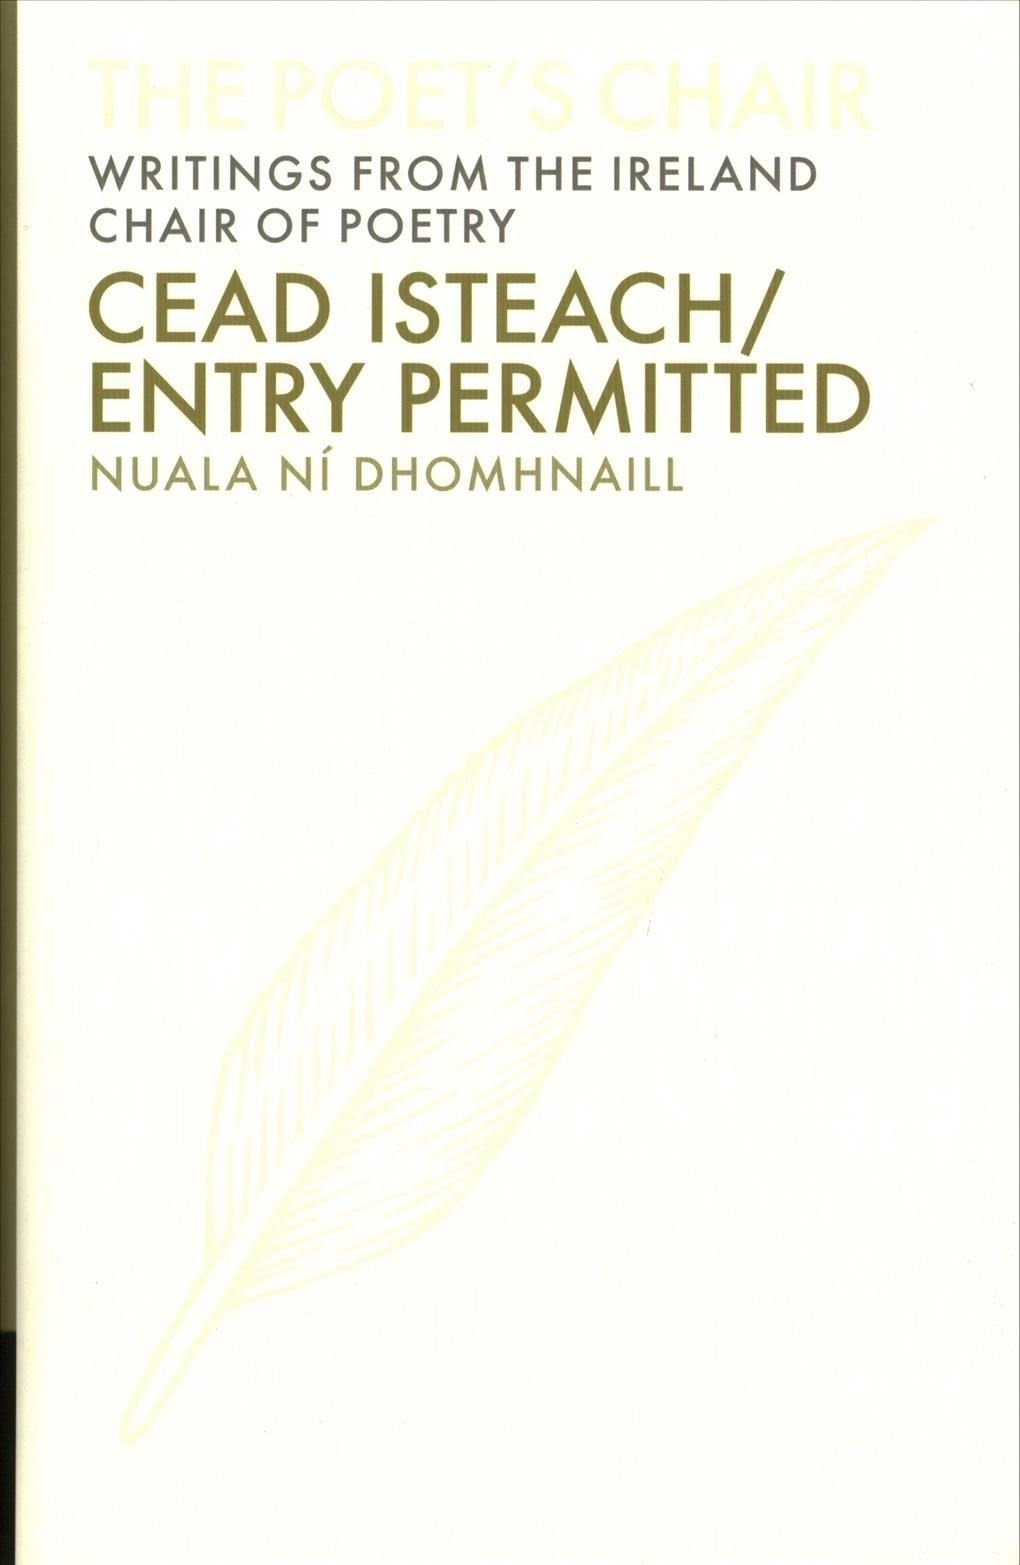 Cead Isteach / Entry Permitted by Nuala Ni Dhomhnaill